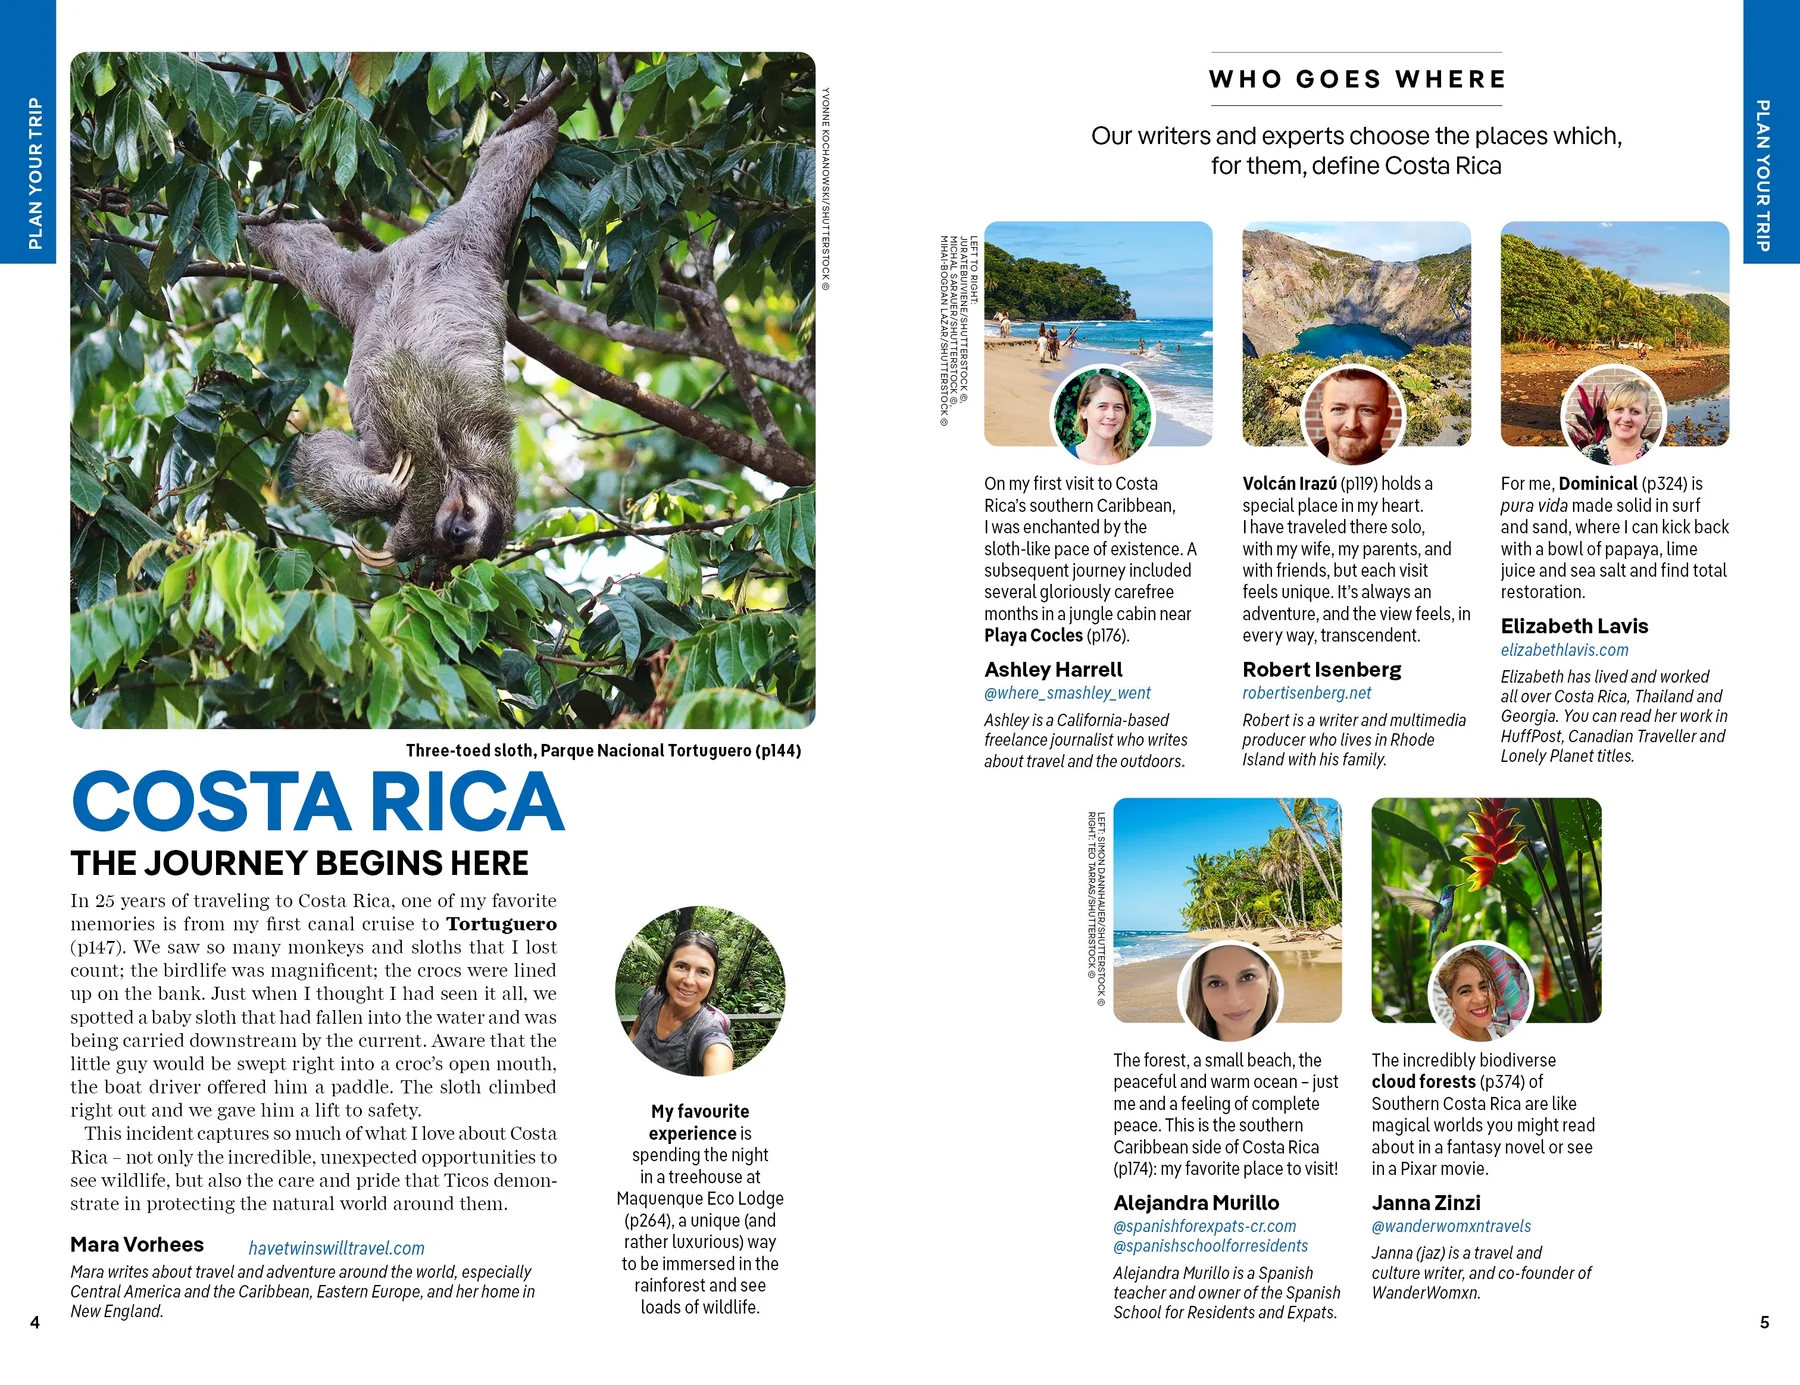 Costa Rica Lonely Planet